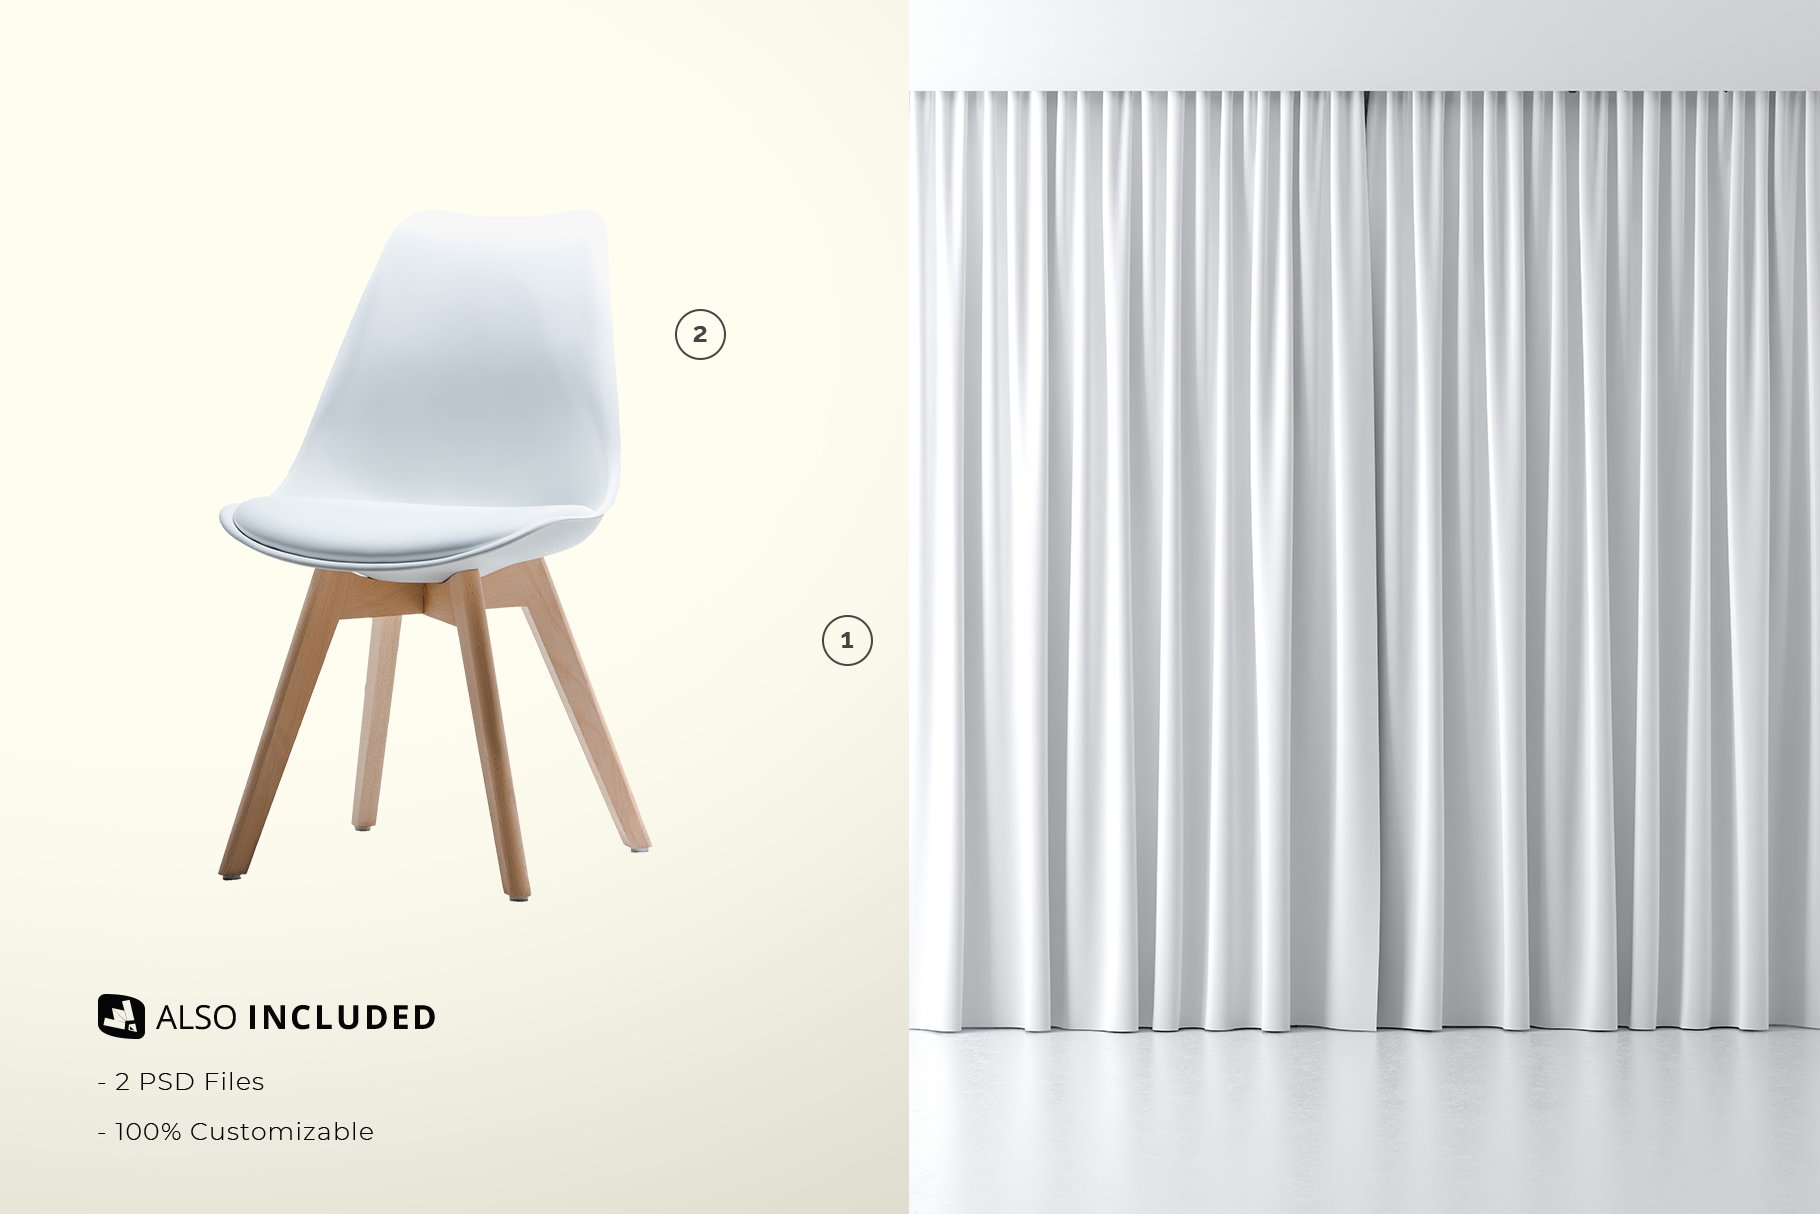 Long Curtain with Chair Mockup - Design Cuts